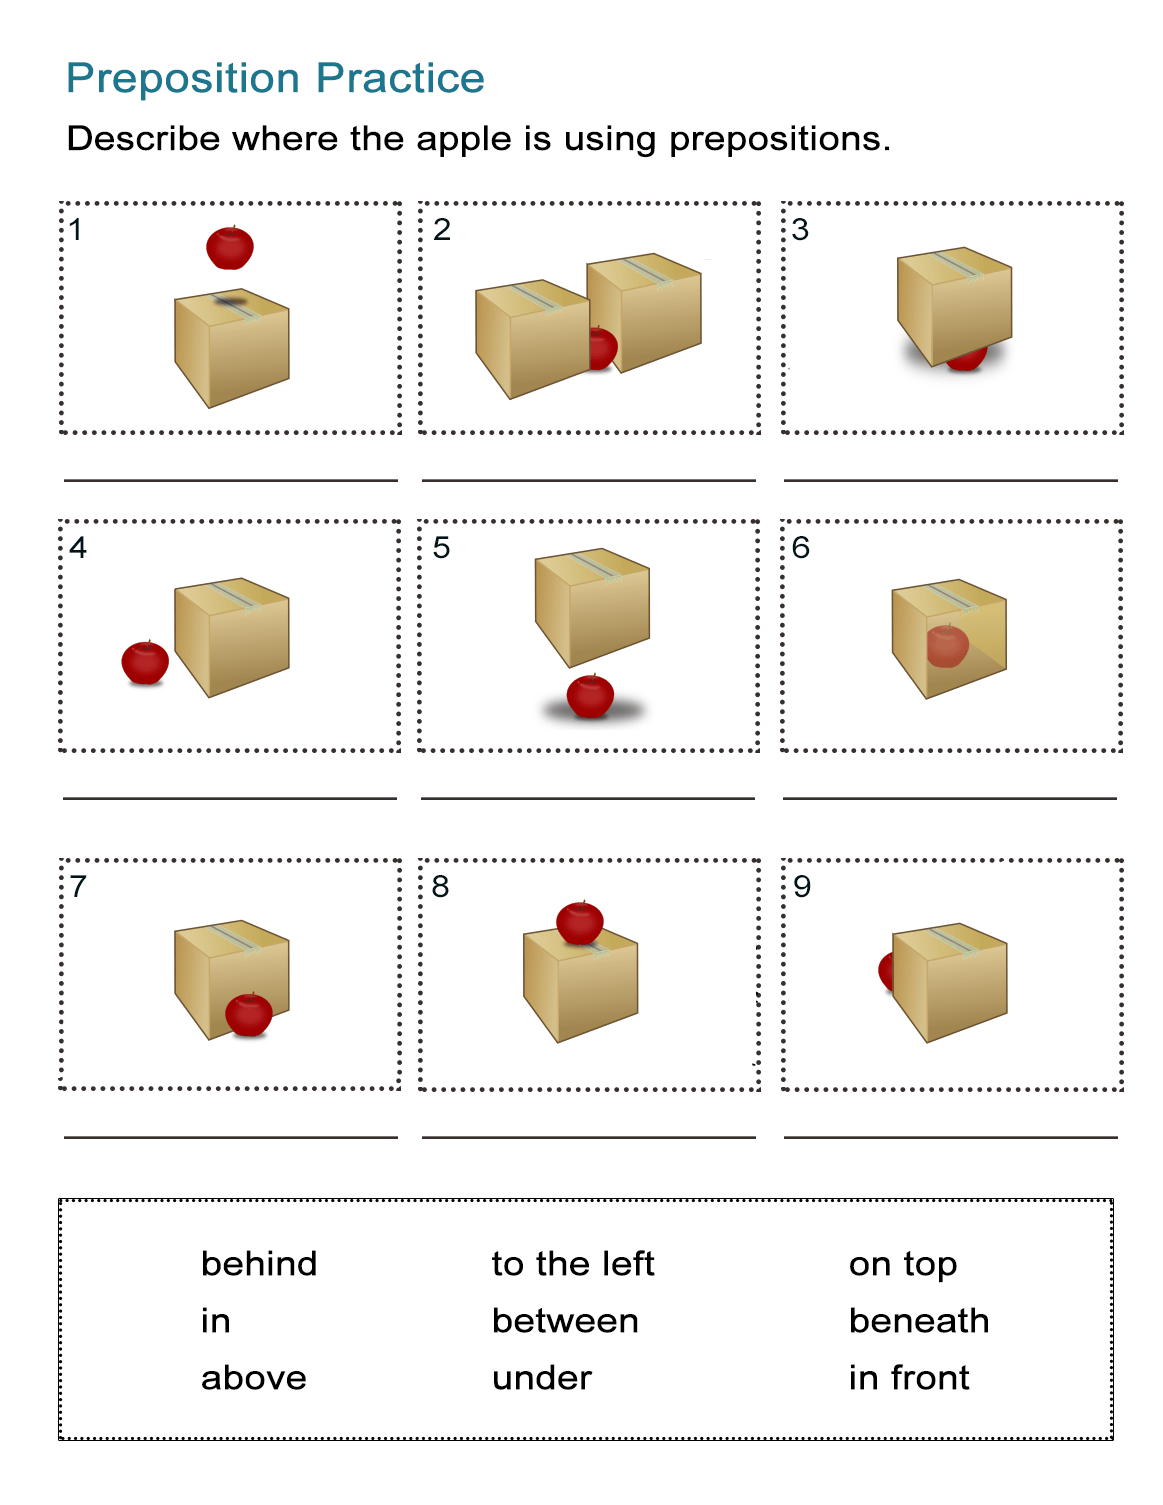 Prepositions of place worksheets for kids